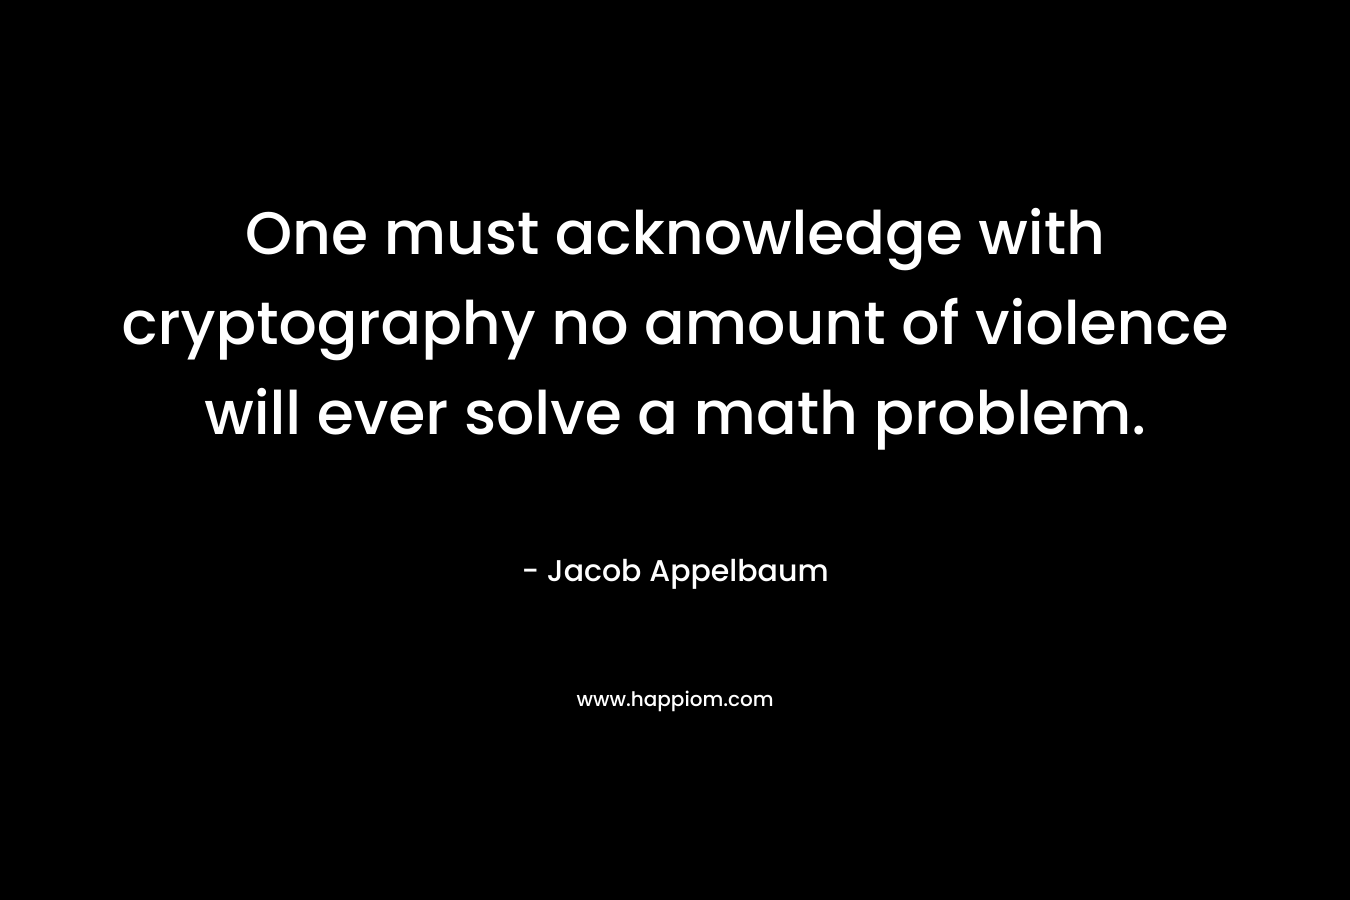 One must acknowledge with cryptography no amount of violence will ever solve a math problem. – Jacob Appelbaum